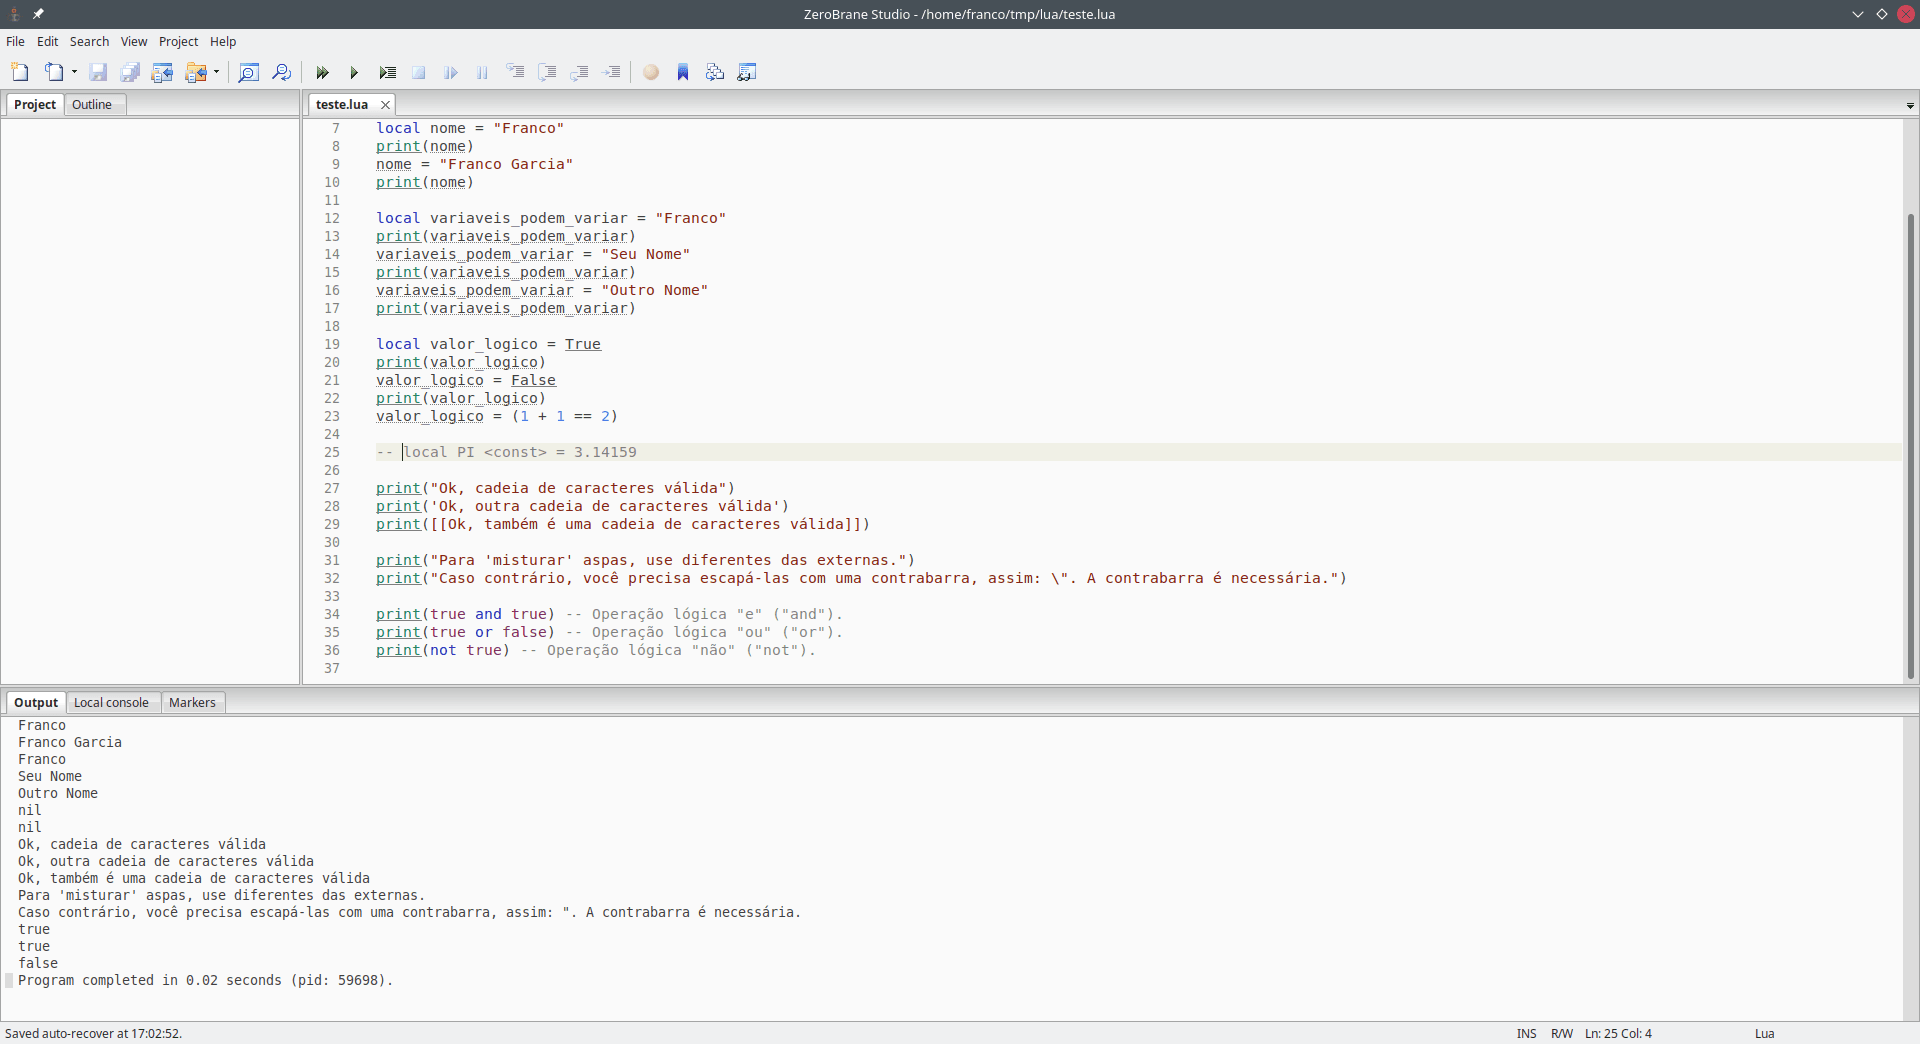 An image of ZeroBrane Studio, an IDE for programming in Lua, with examples of the source code snippets presented in the article written in the text editor and their results on the shell.